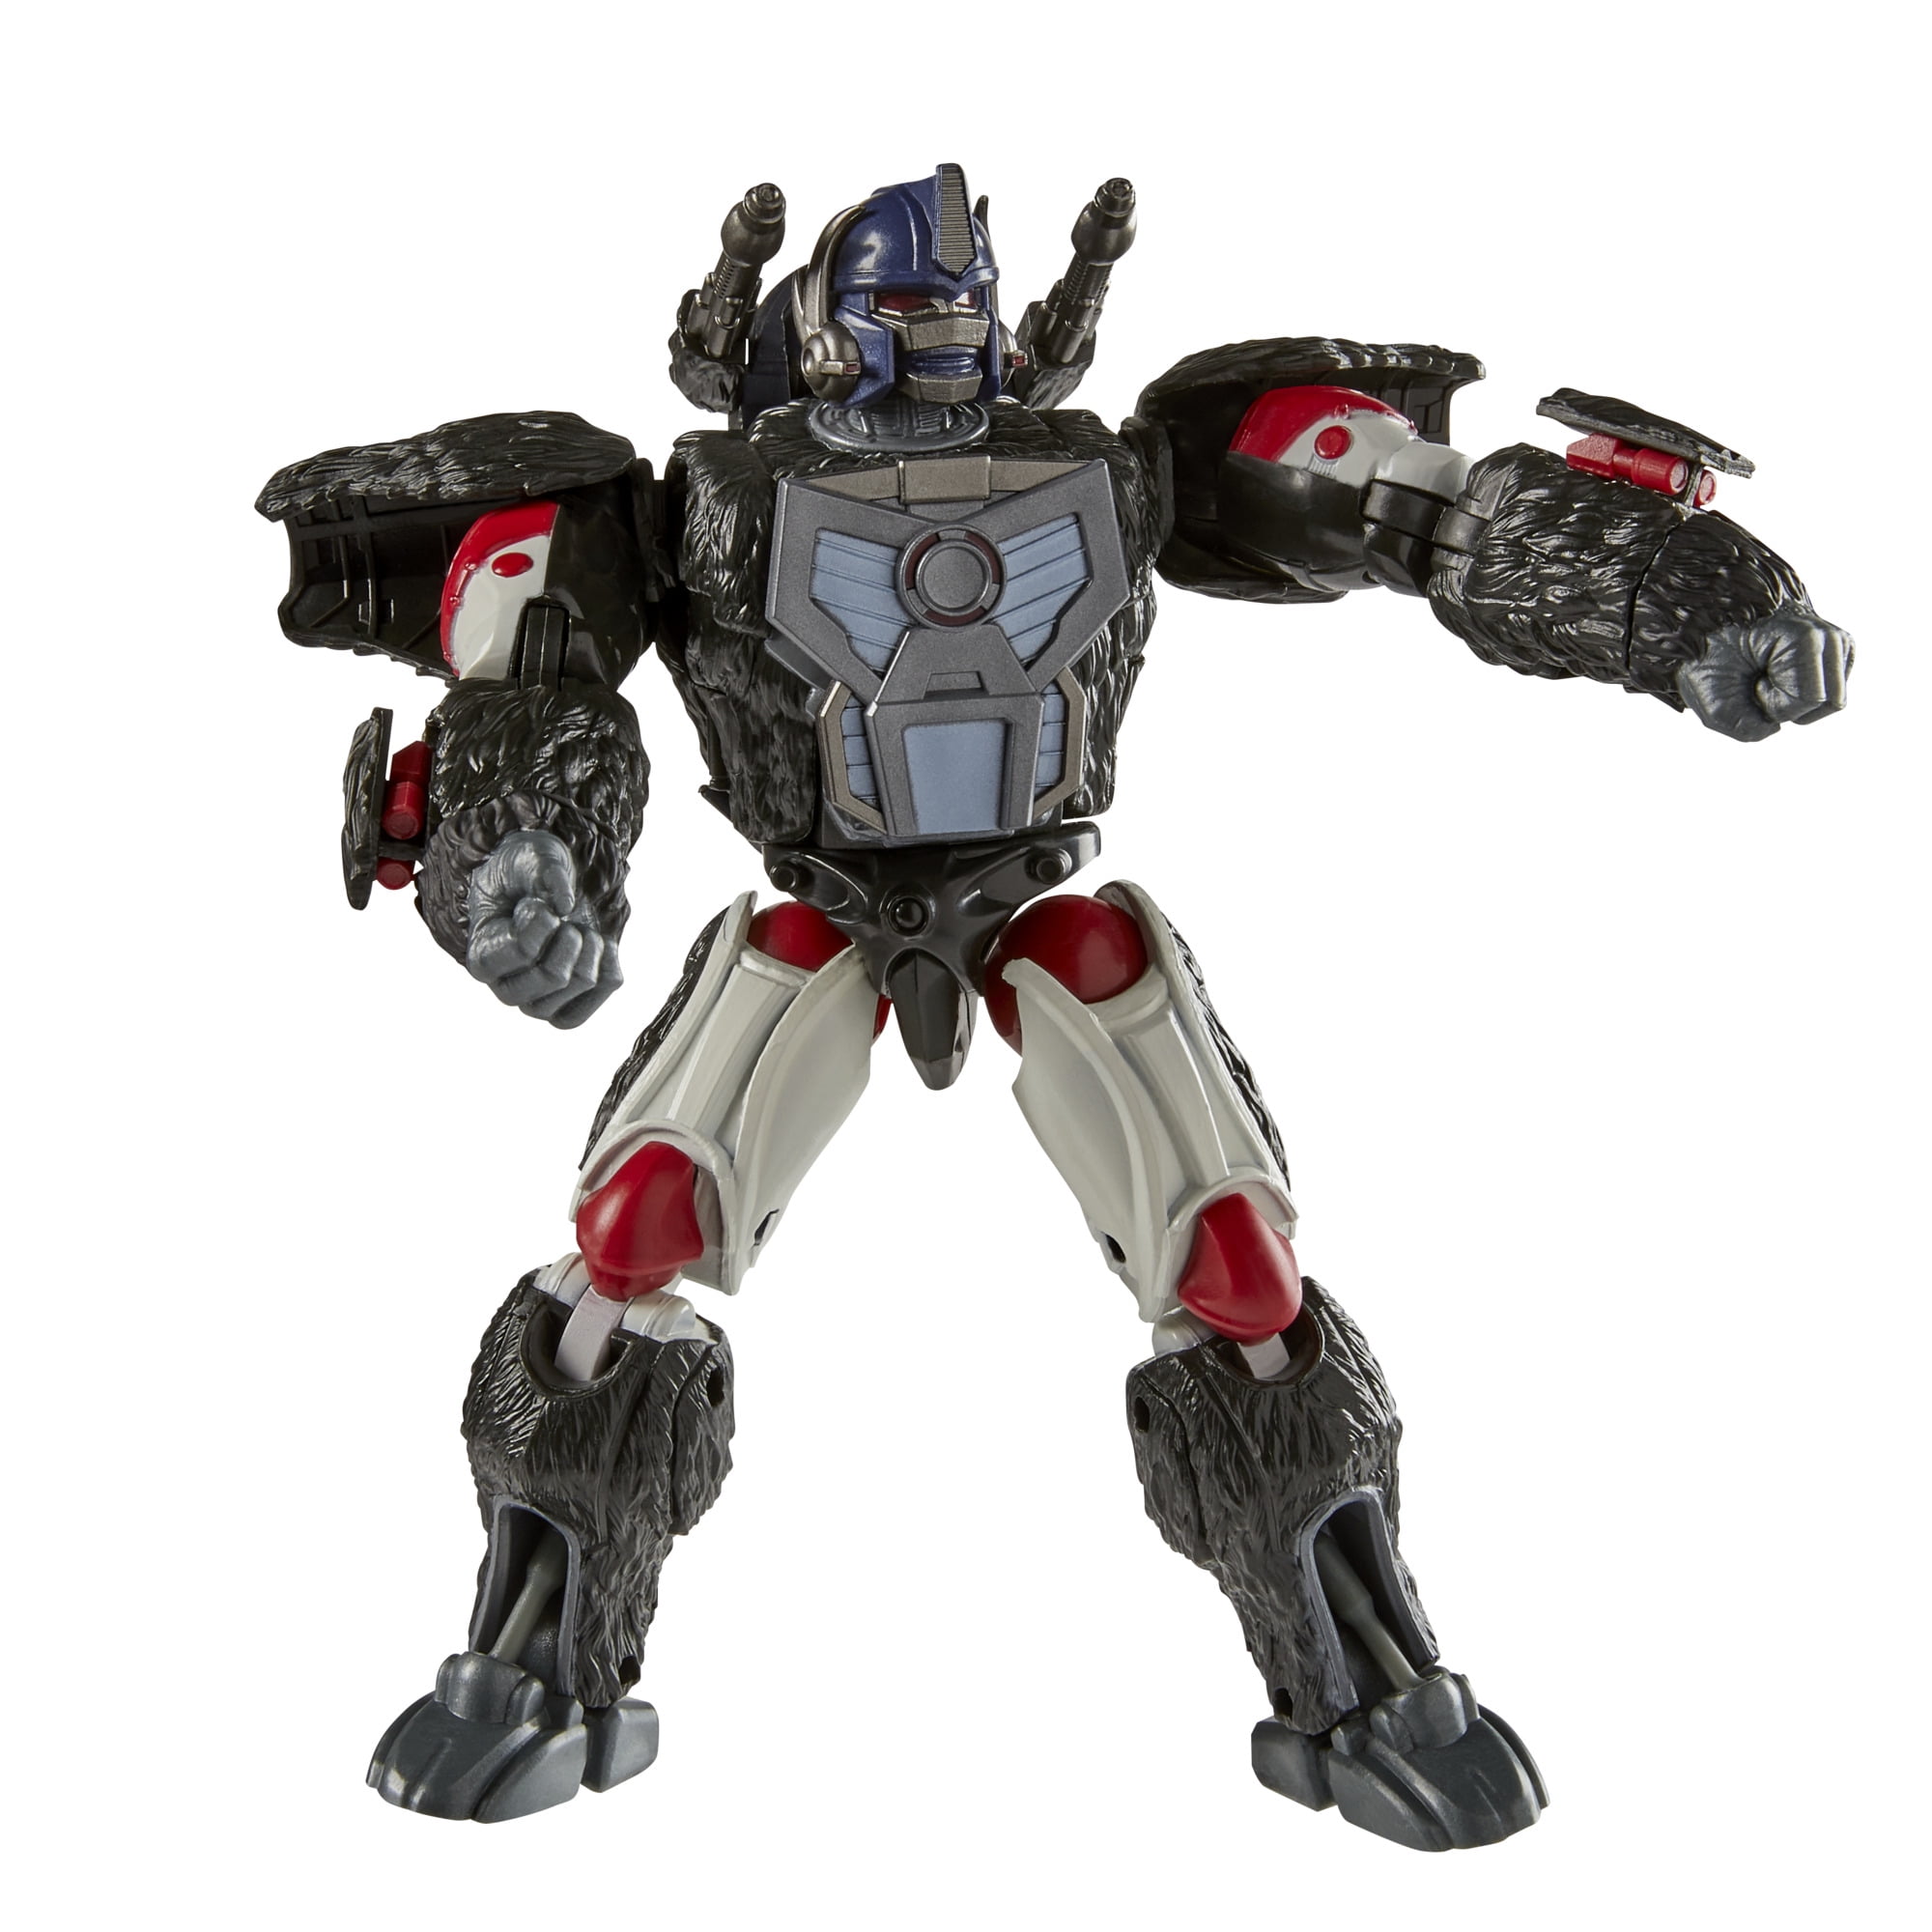 Hasbro Transformers Special Edition Universe Deluxe Class Robot OPTIMUS PRIME with Blaster Rifle Action Figure for sale online 